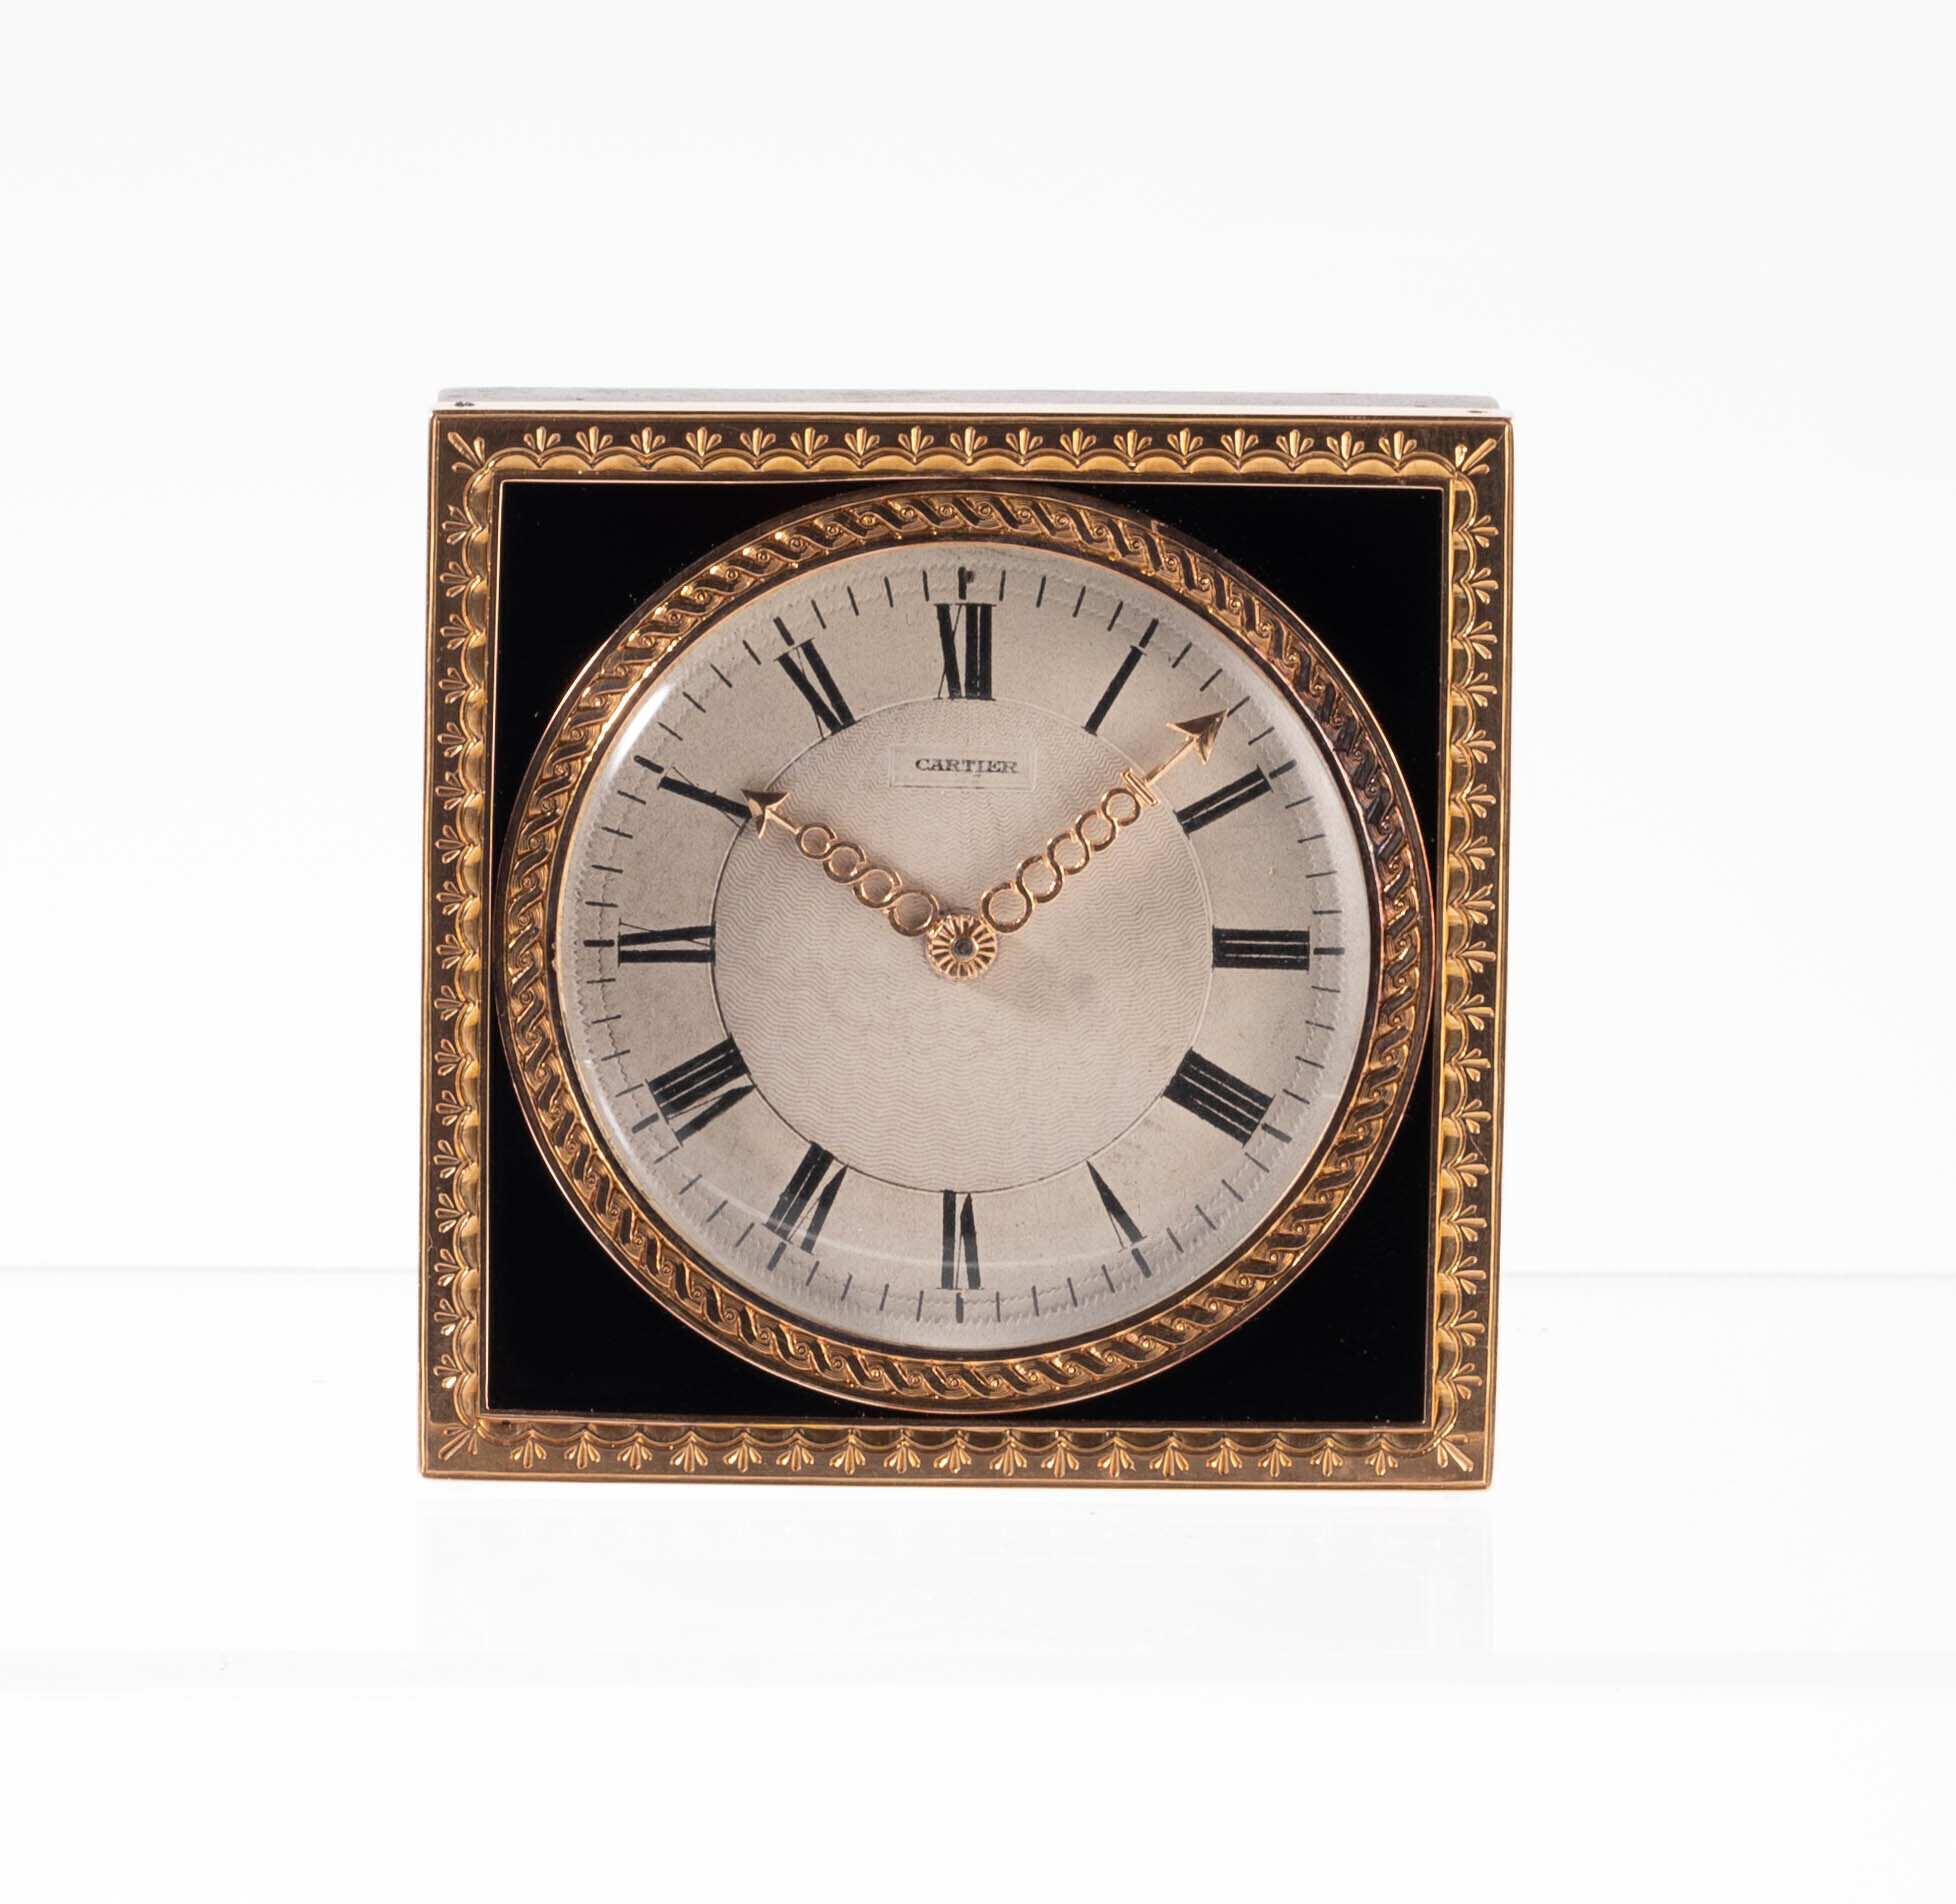 CARTIER EUROPEAN WATCH AND CLOCK COMPANY 18K ROSE GOLD AND FRENCH LACQUER DESK CLOCK